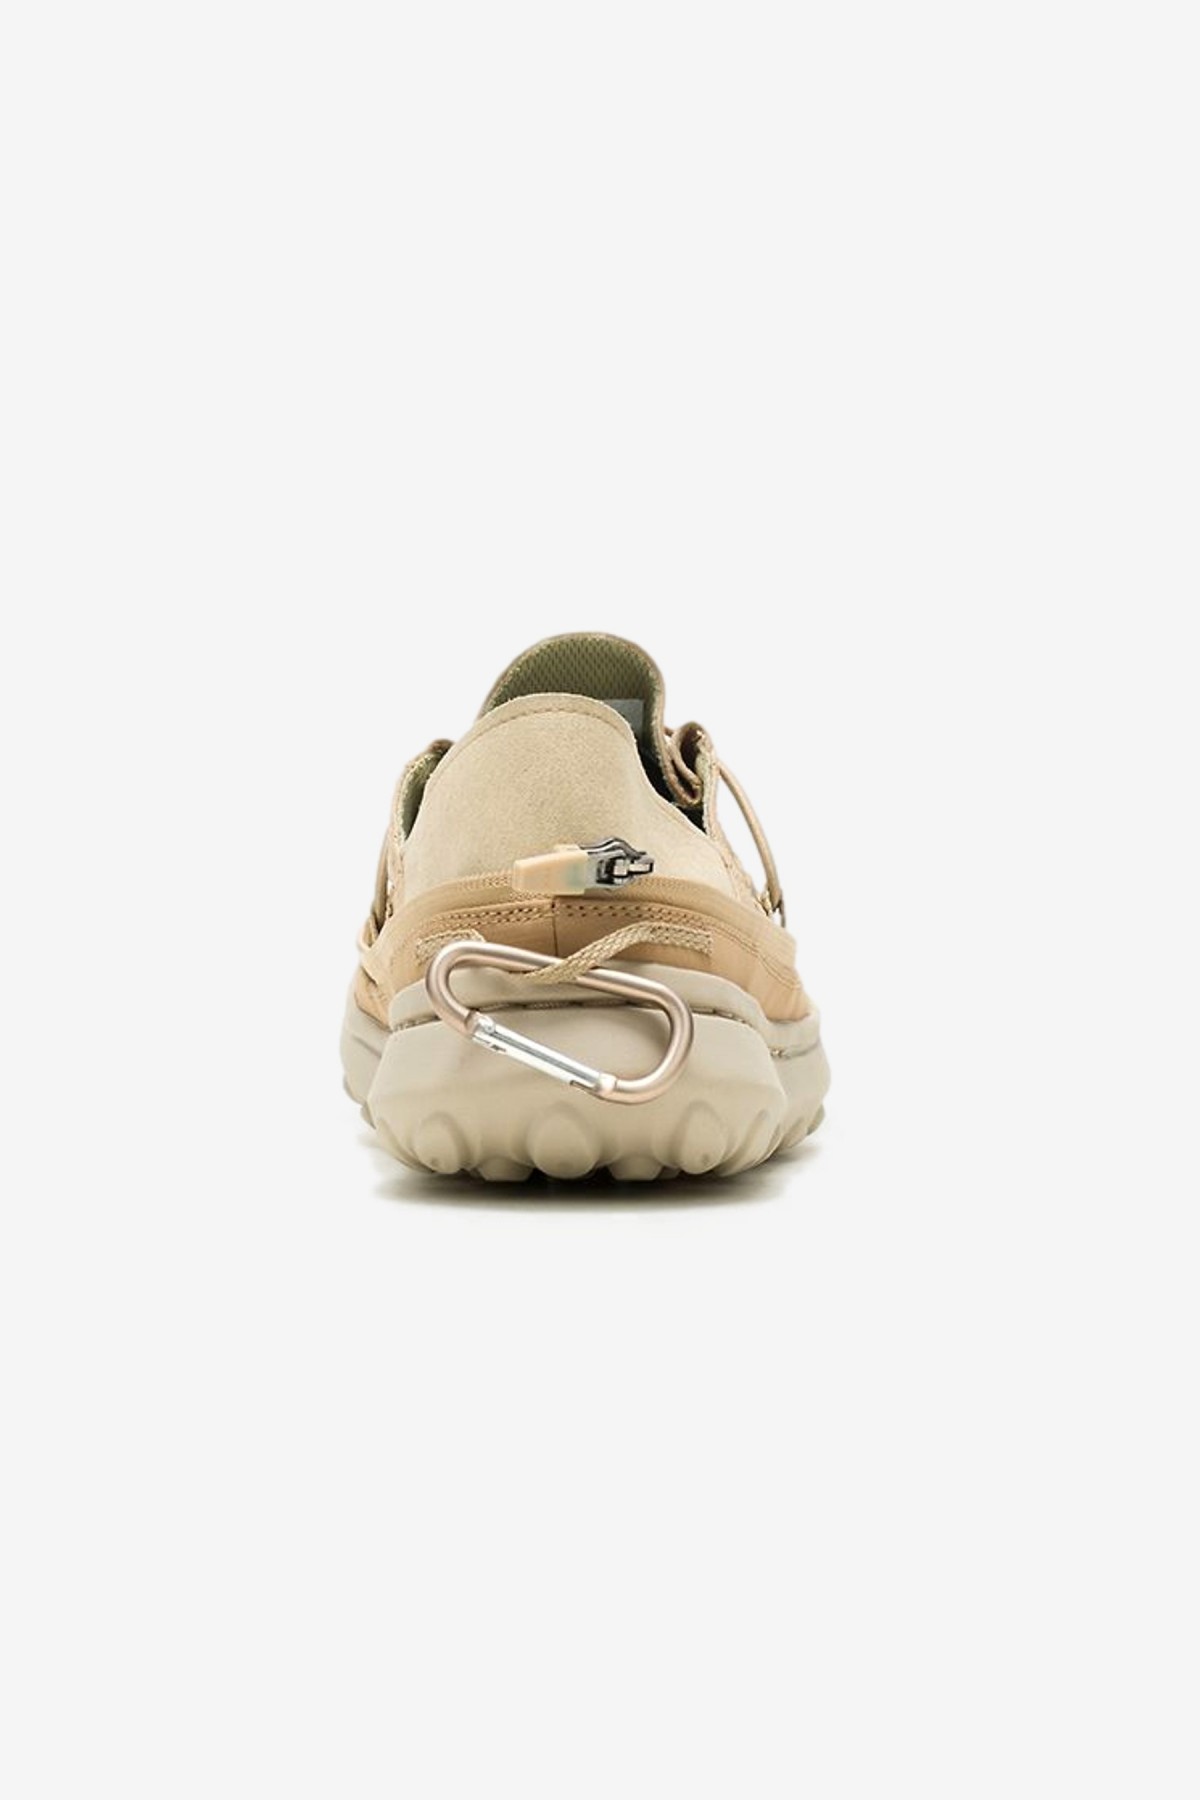 Merrell Hut Moc 2 Pack 1TRL in Incense